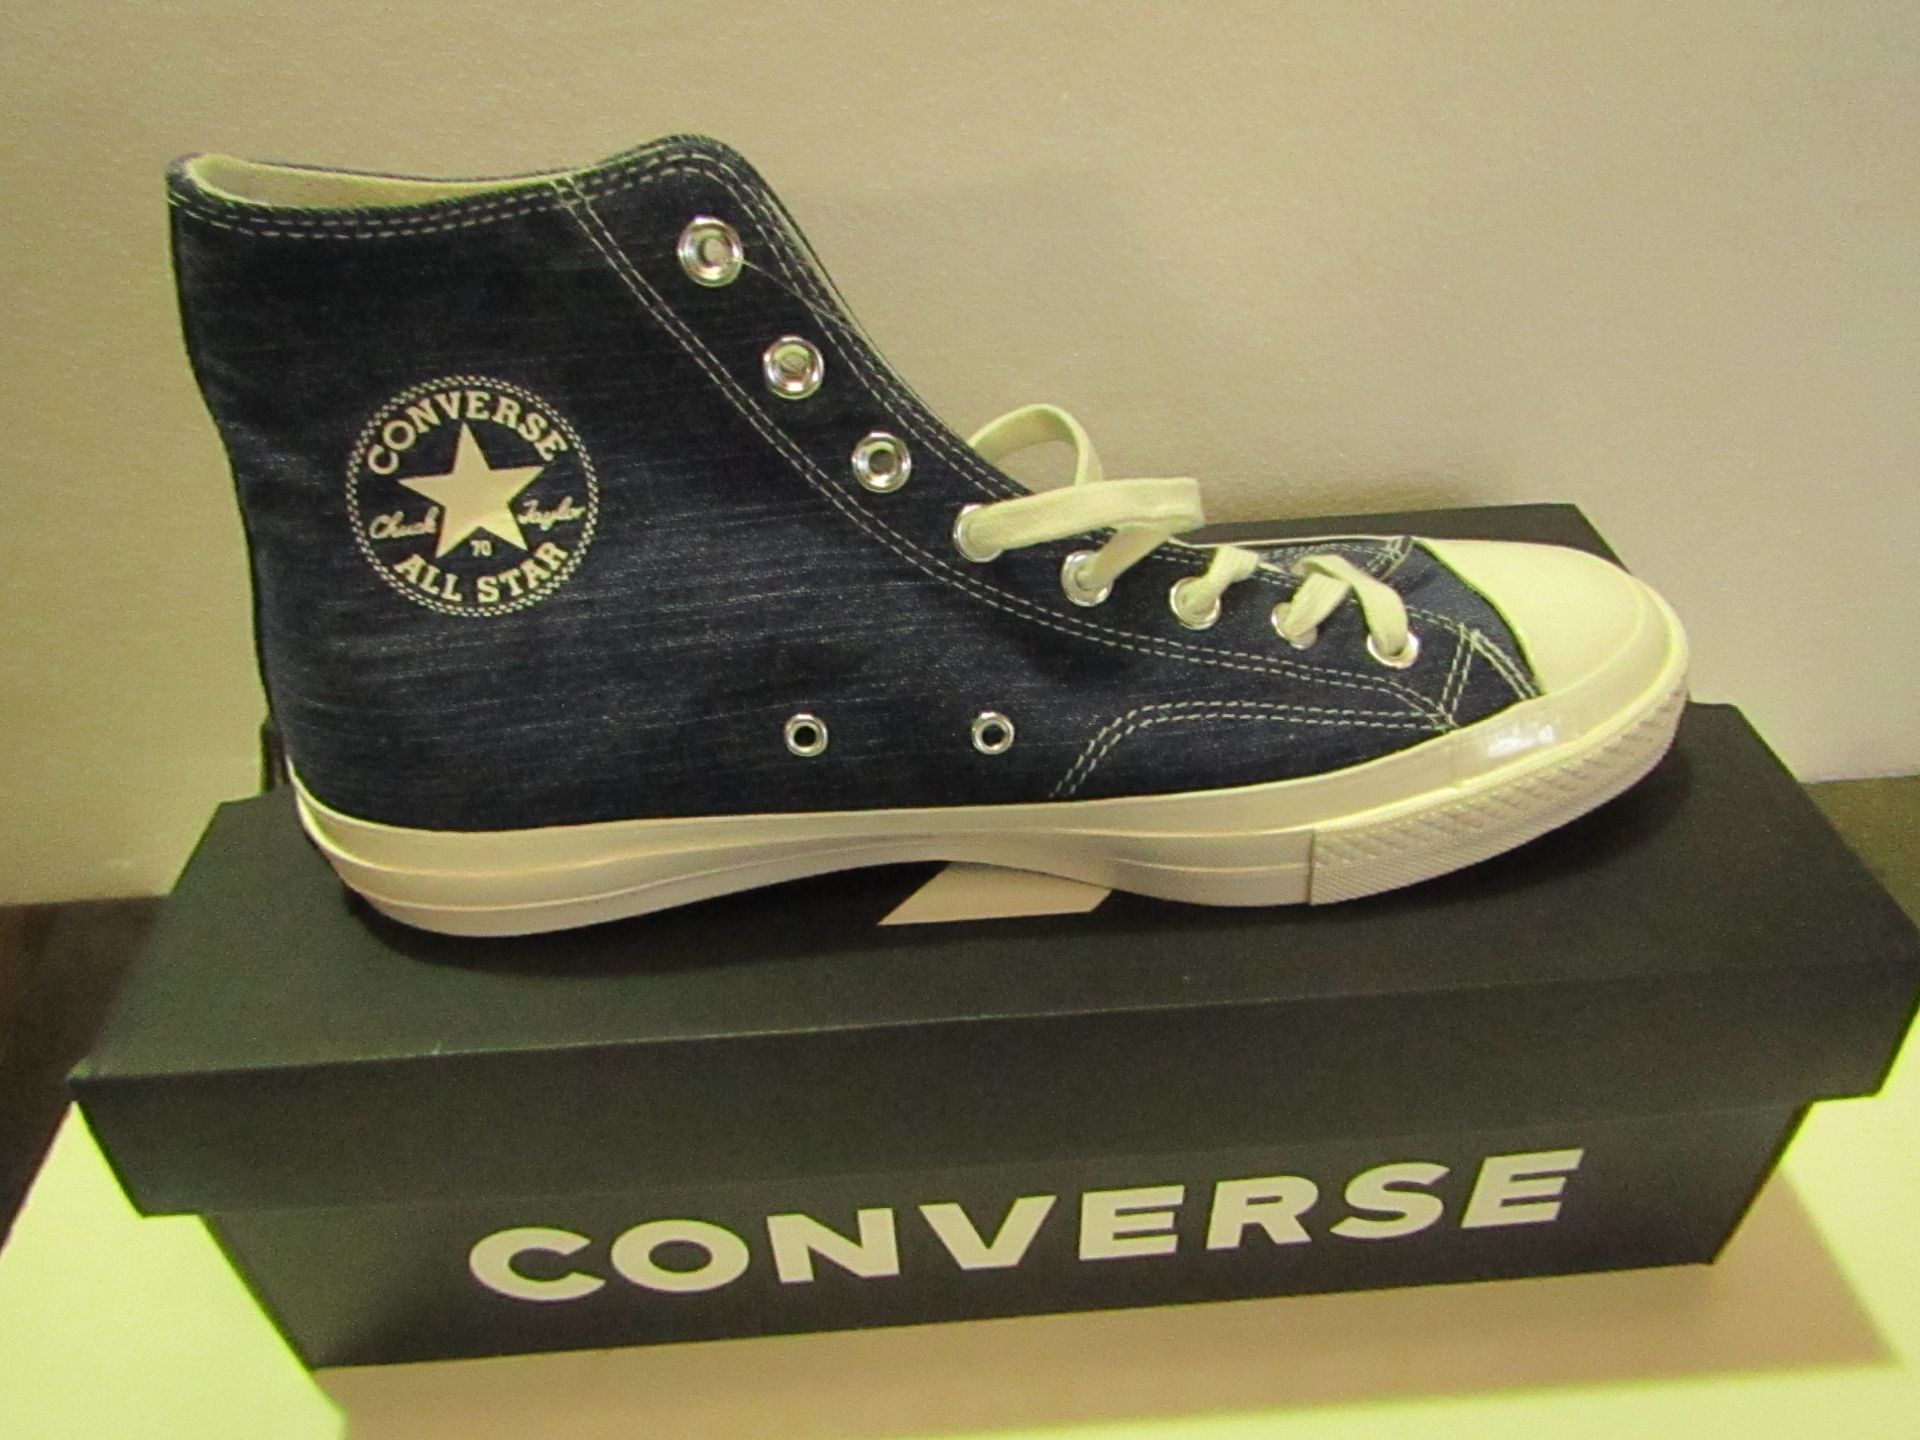 Converse High Top Dark Denim/Egret Canvas Trainer size UK11 new & boxed see image for design